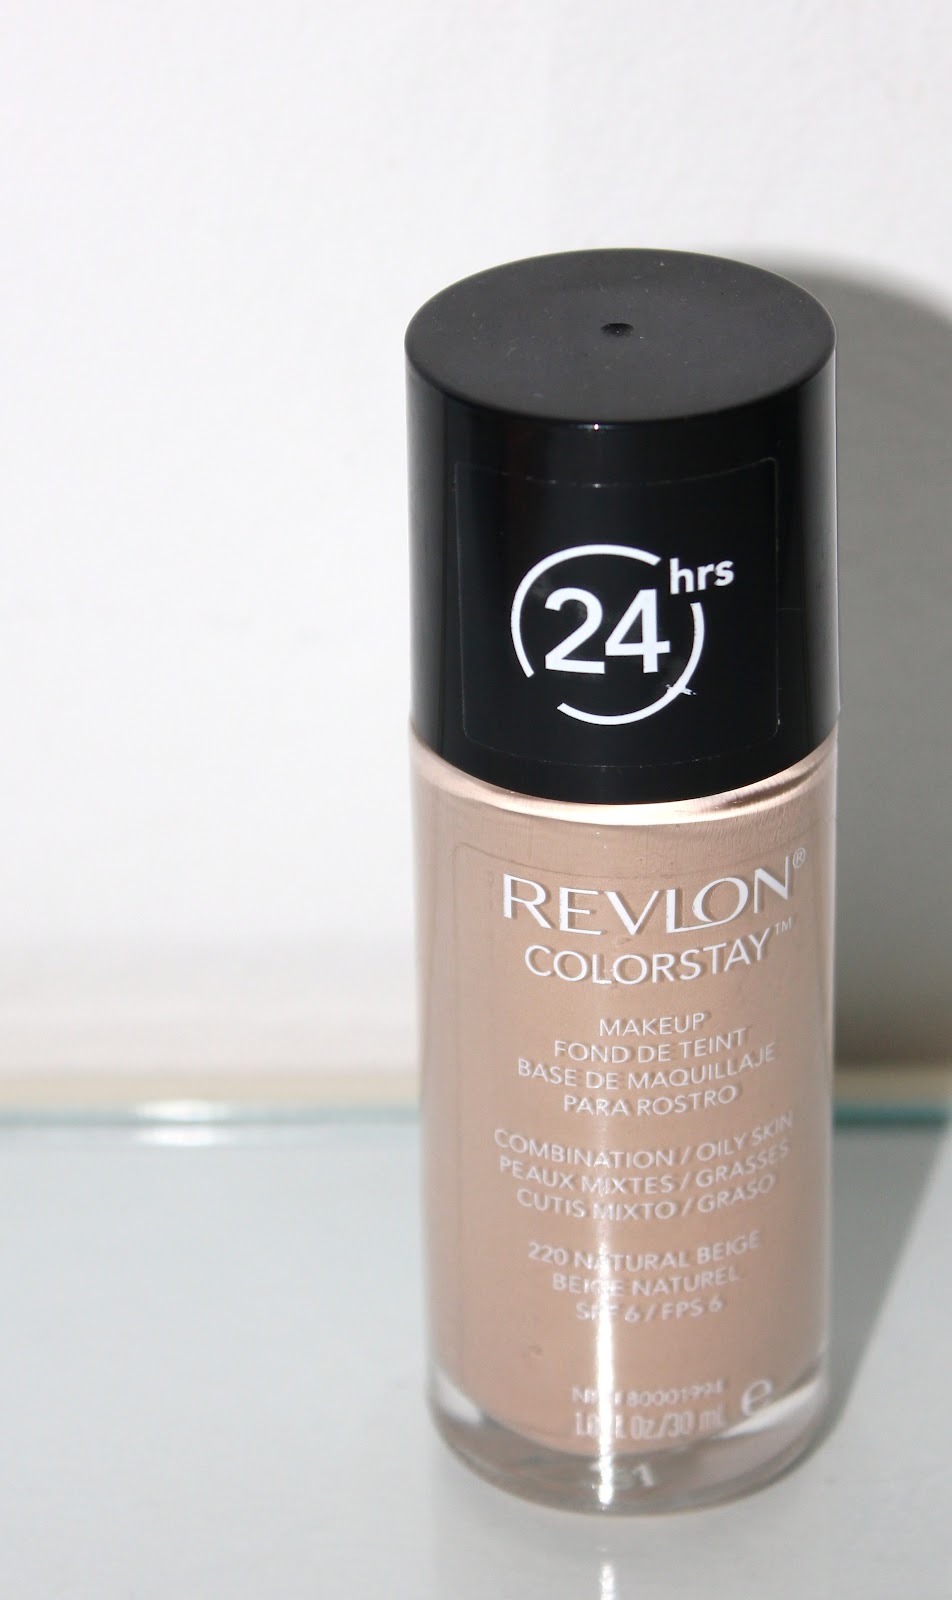 10 Things I would Repurchase: Part 2